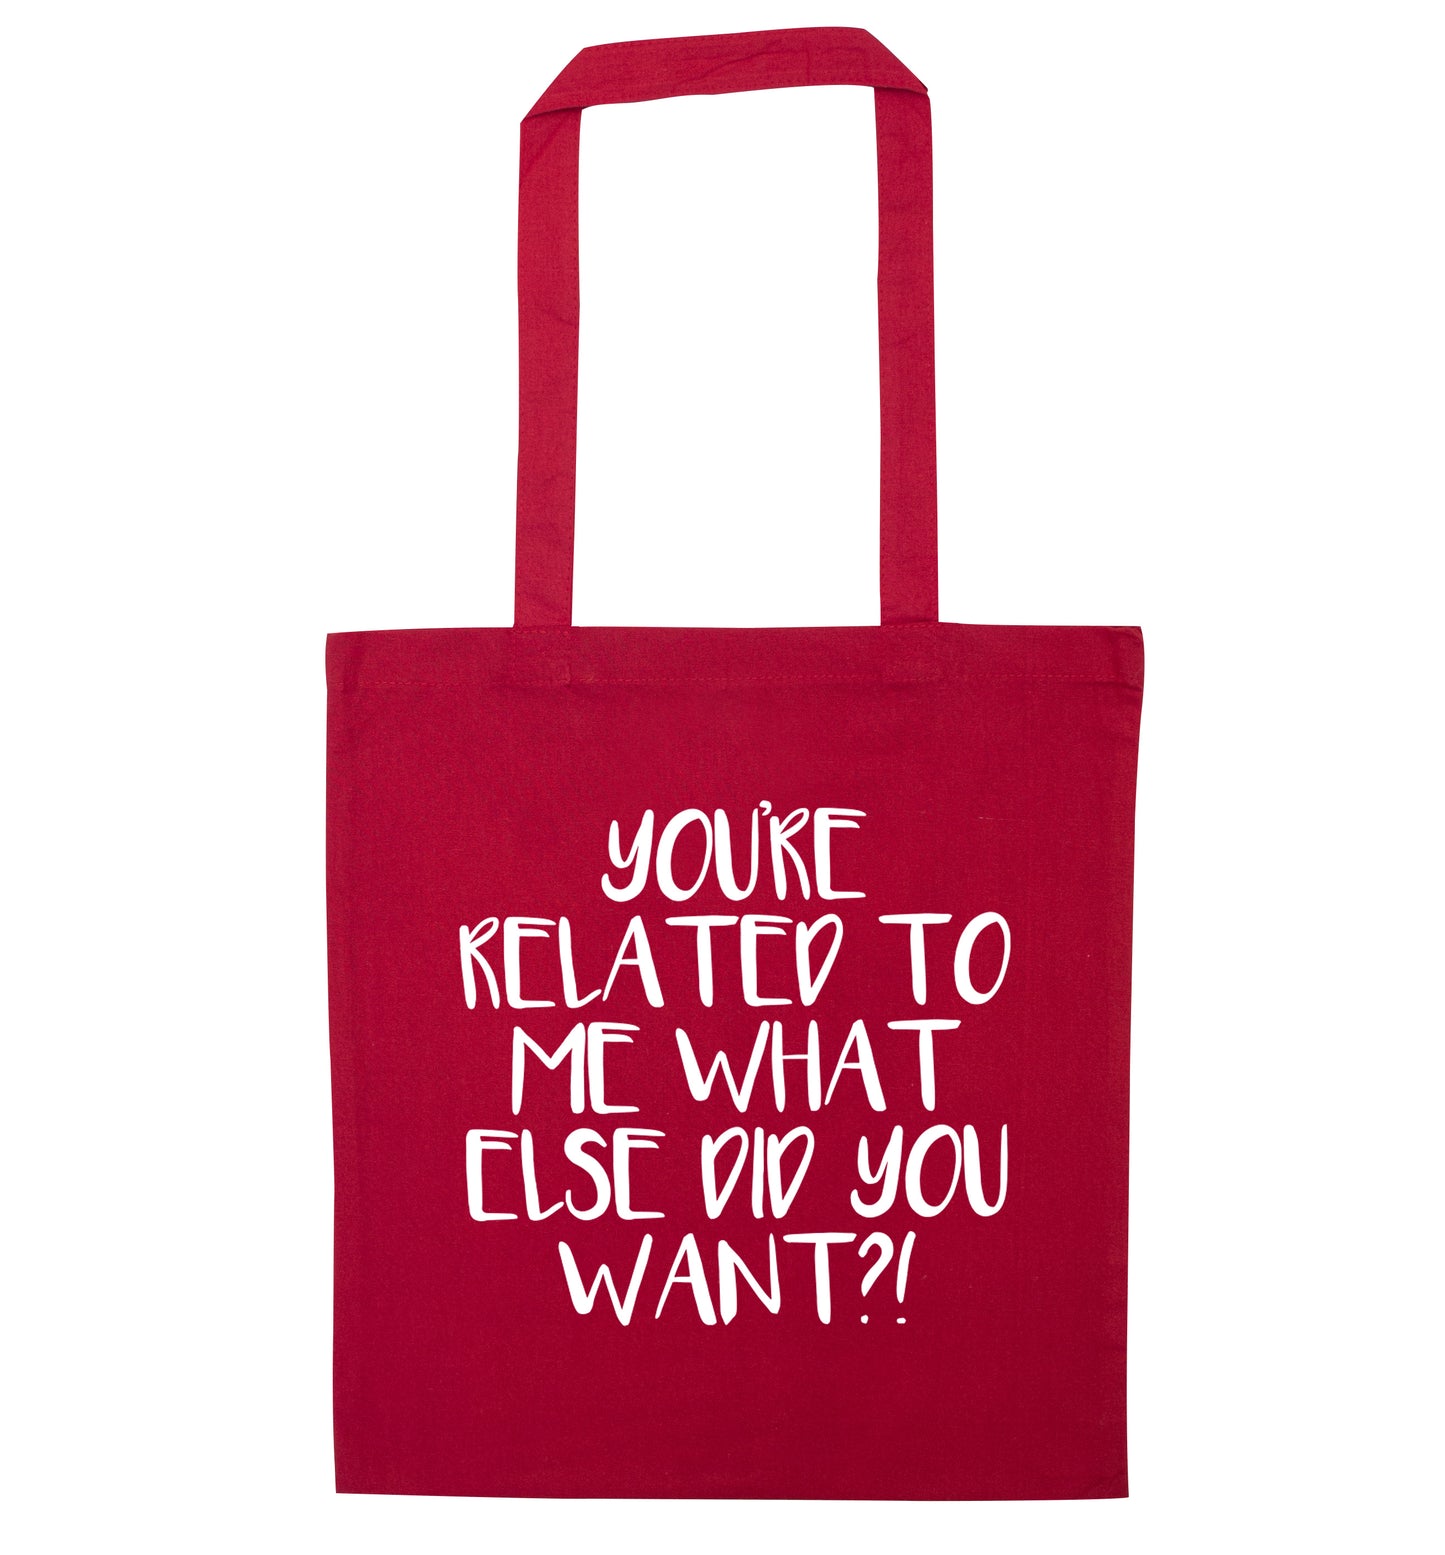 You're related to me what more do you want? red tote bag